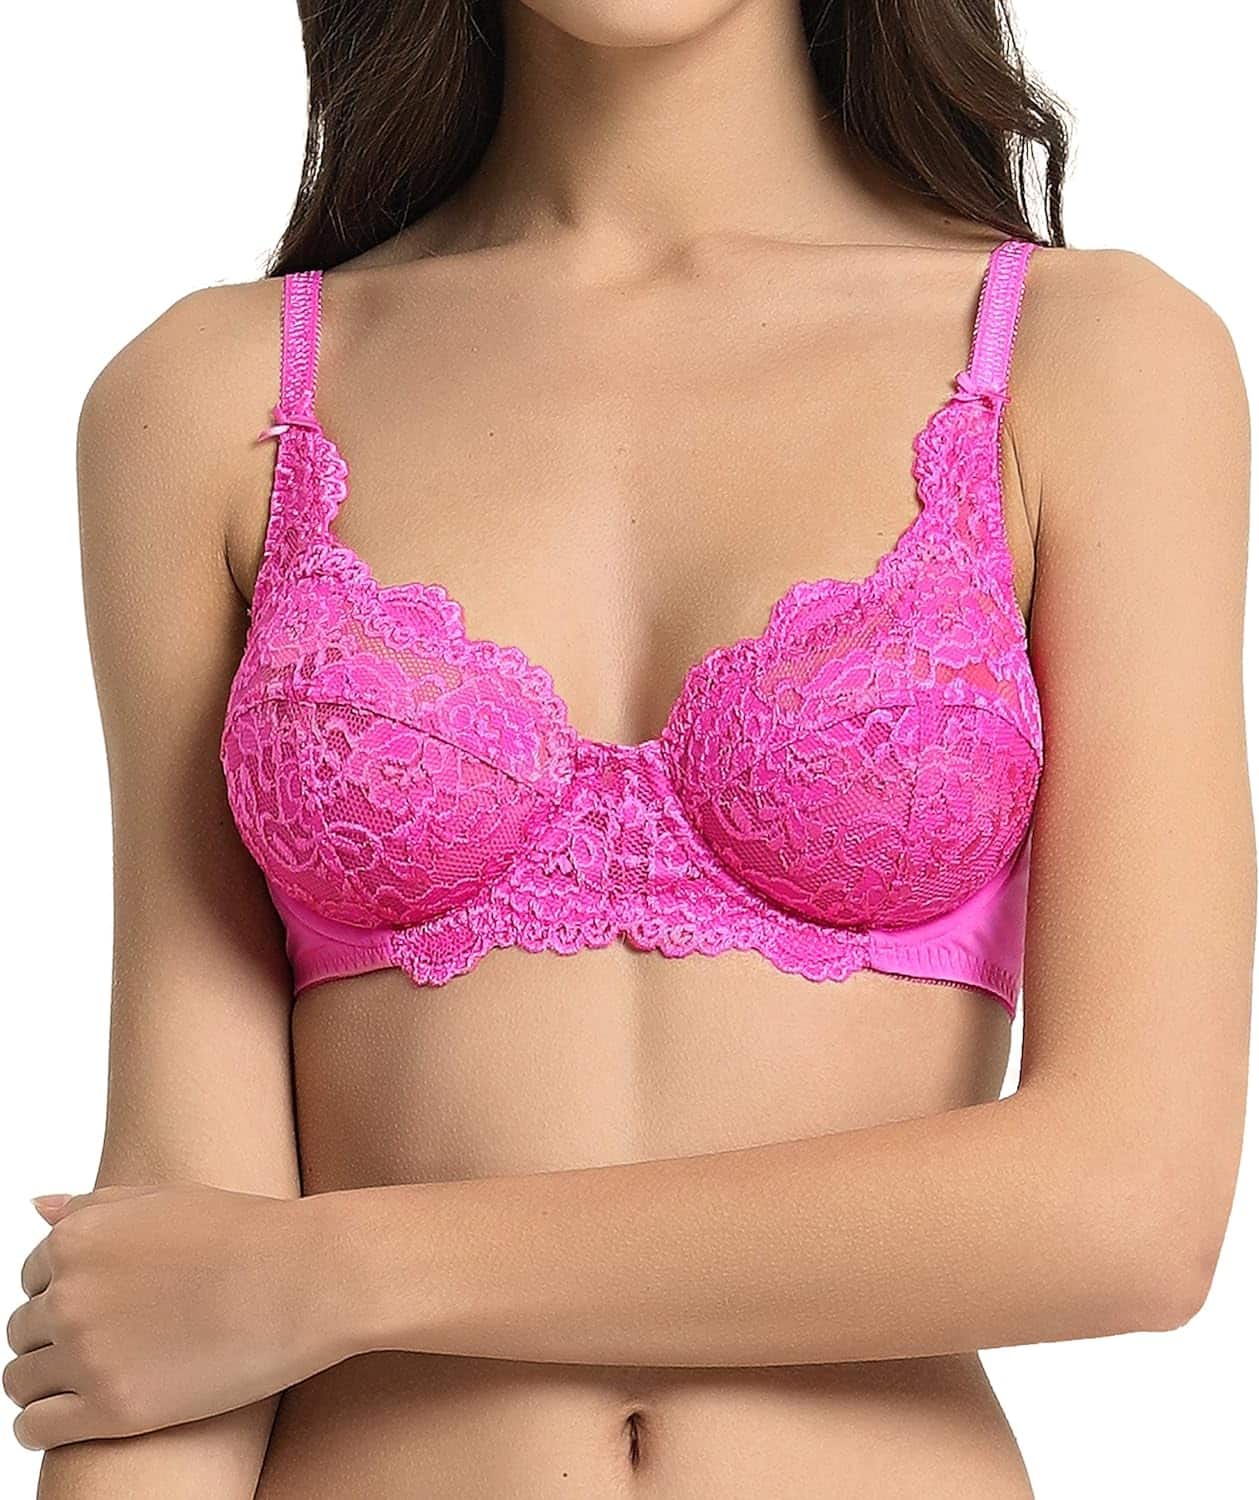 vanever lace bra review